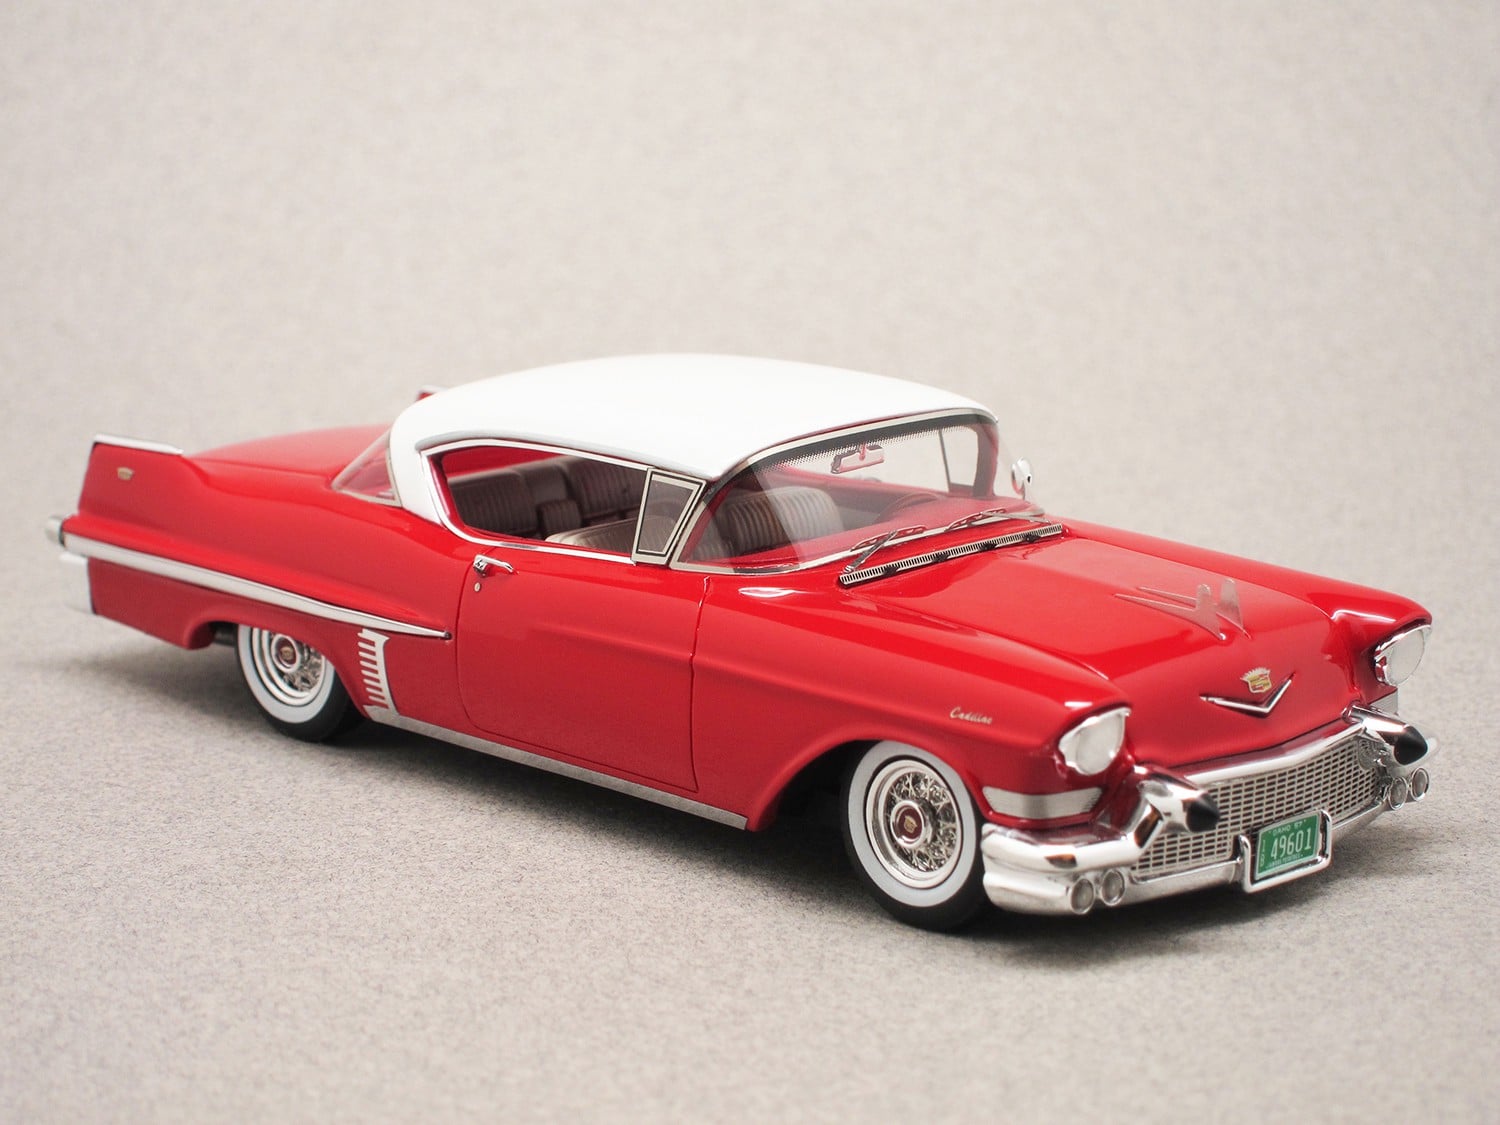 Cadillac Series 62 hardtop coupe 1957 (NEO) 1:43